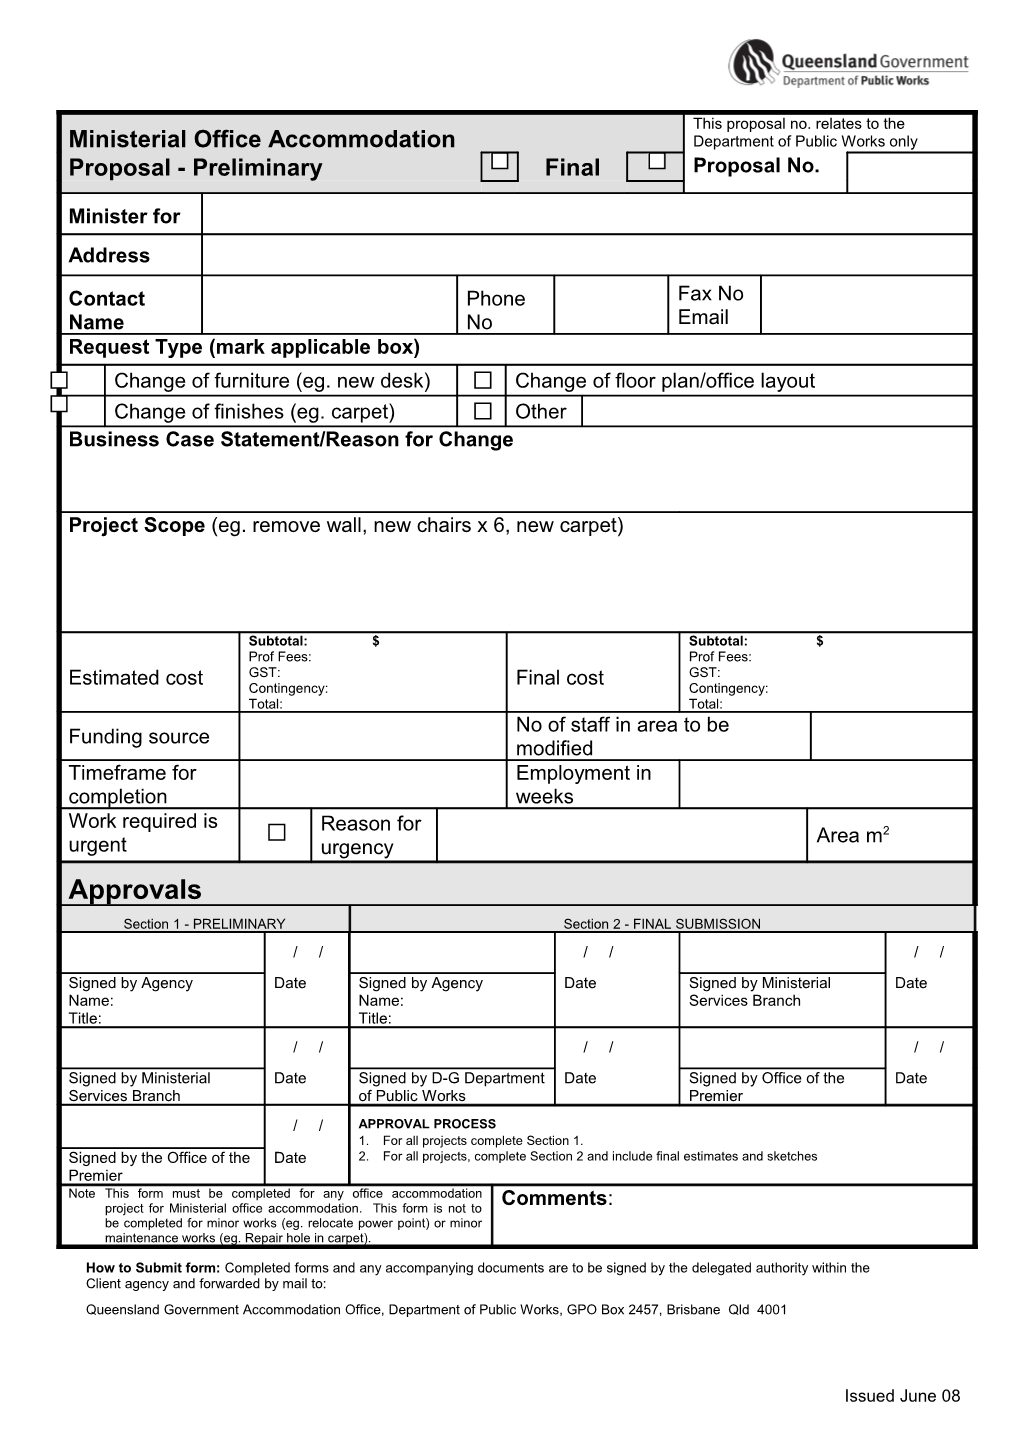 Ministerial Office Accommodation Form